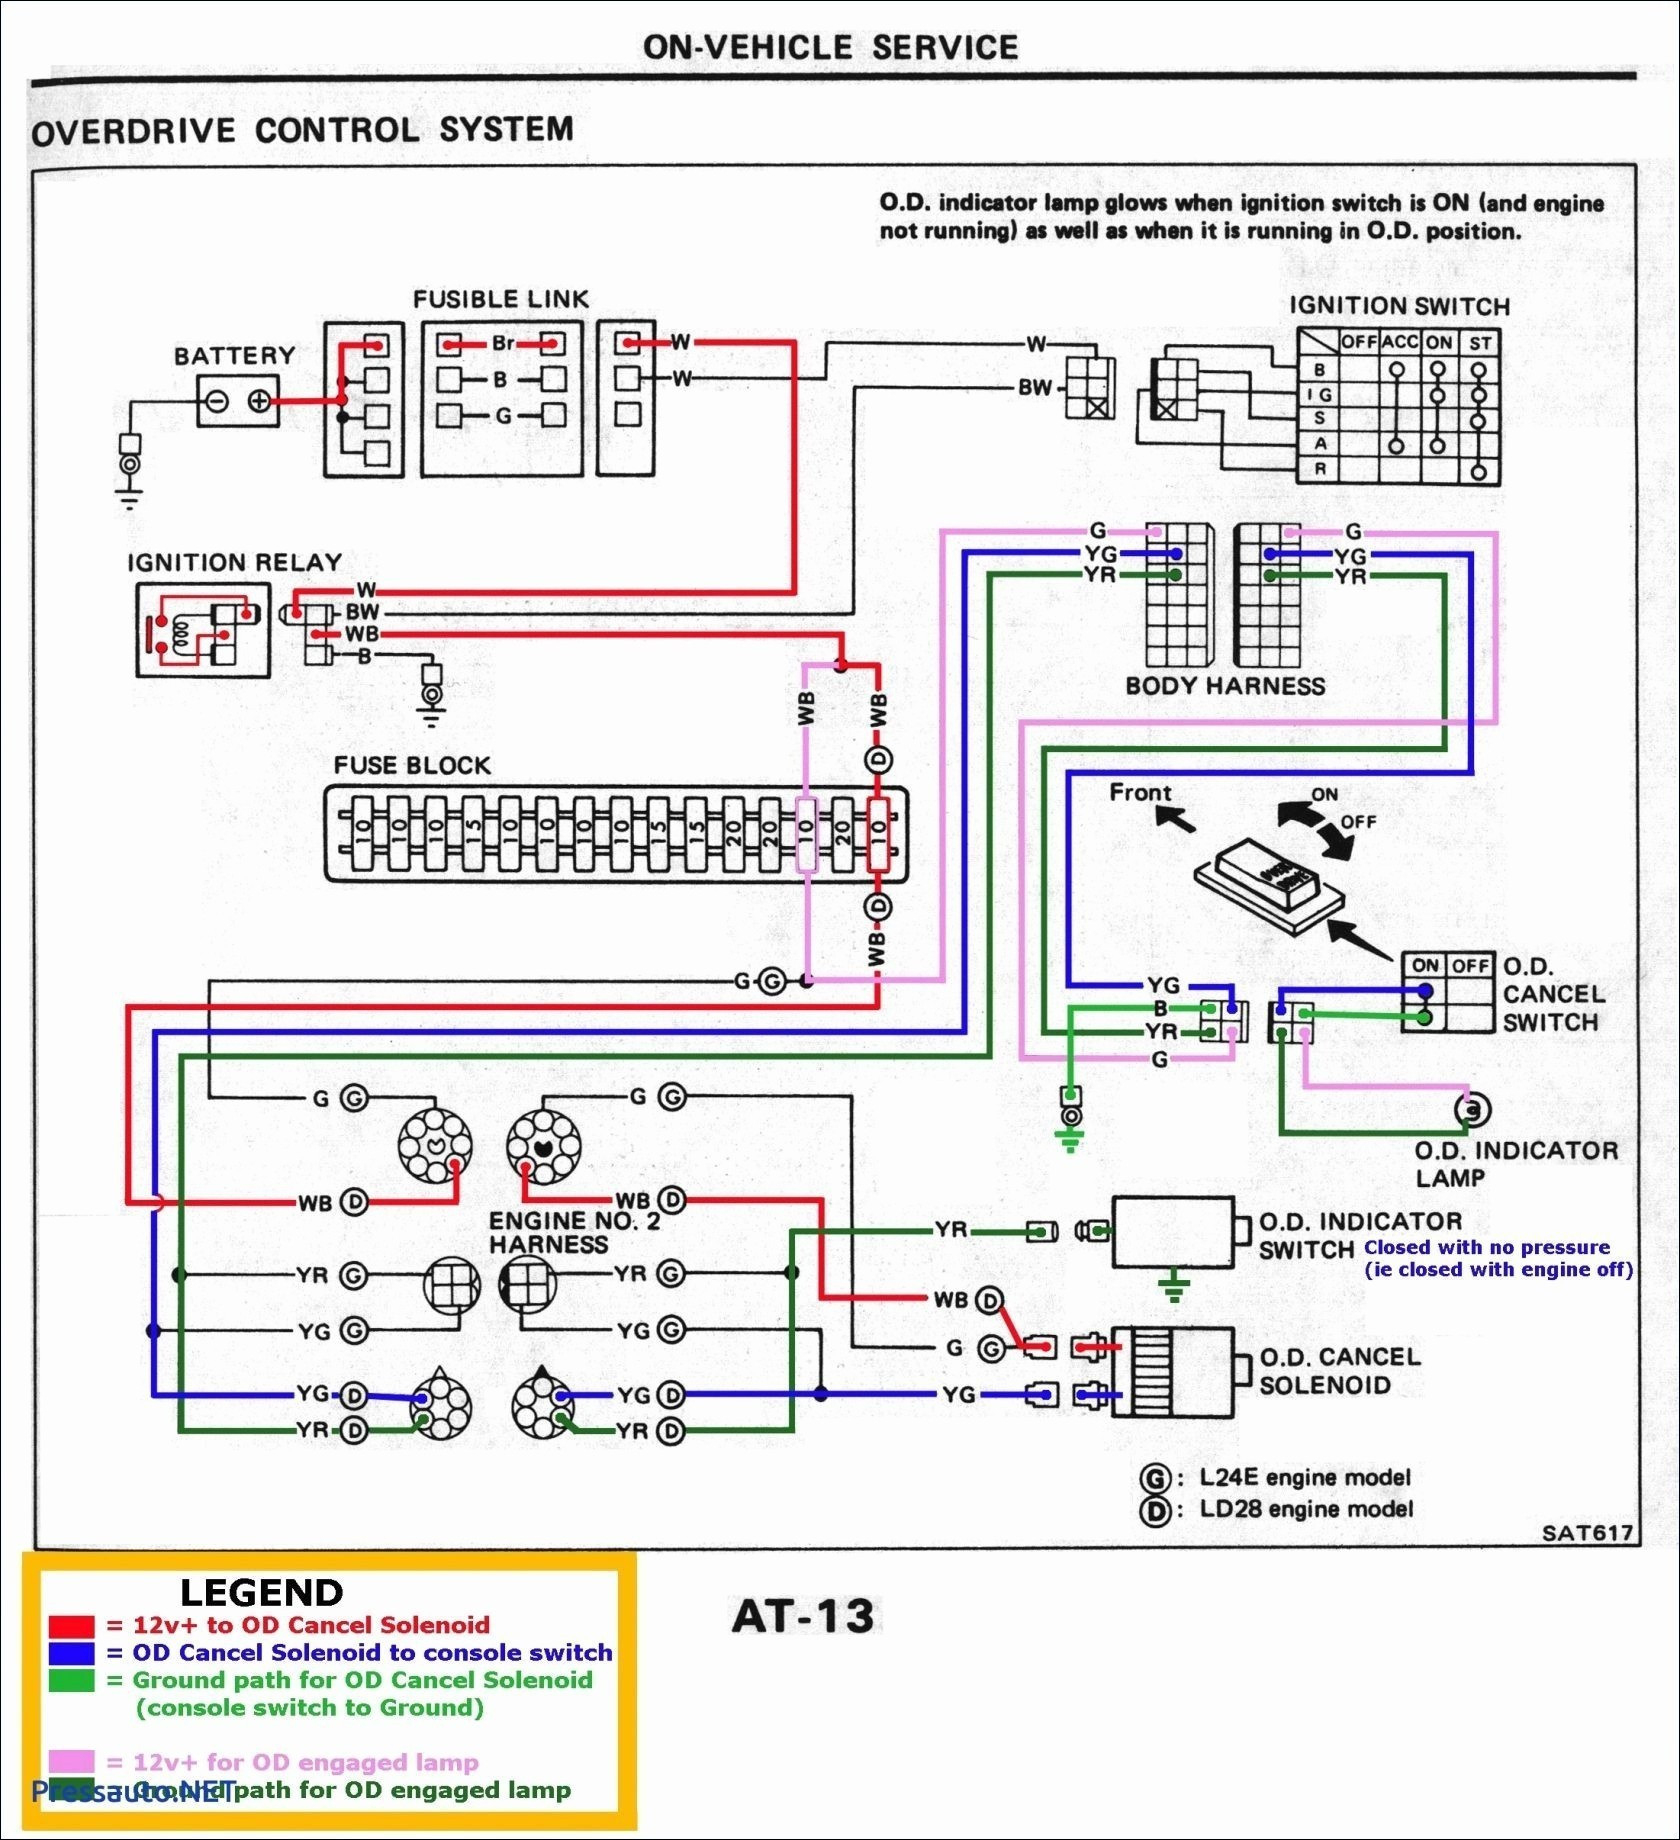 Cat 5 Wiring Diagram B Awesome Wiring Diagram For Cat5 Cable Best - Cat5 Wiring Diagram B